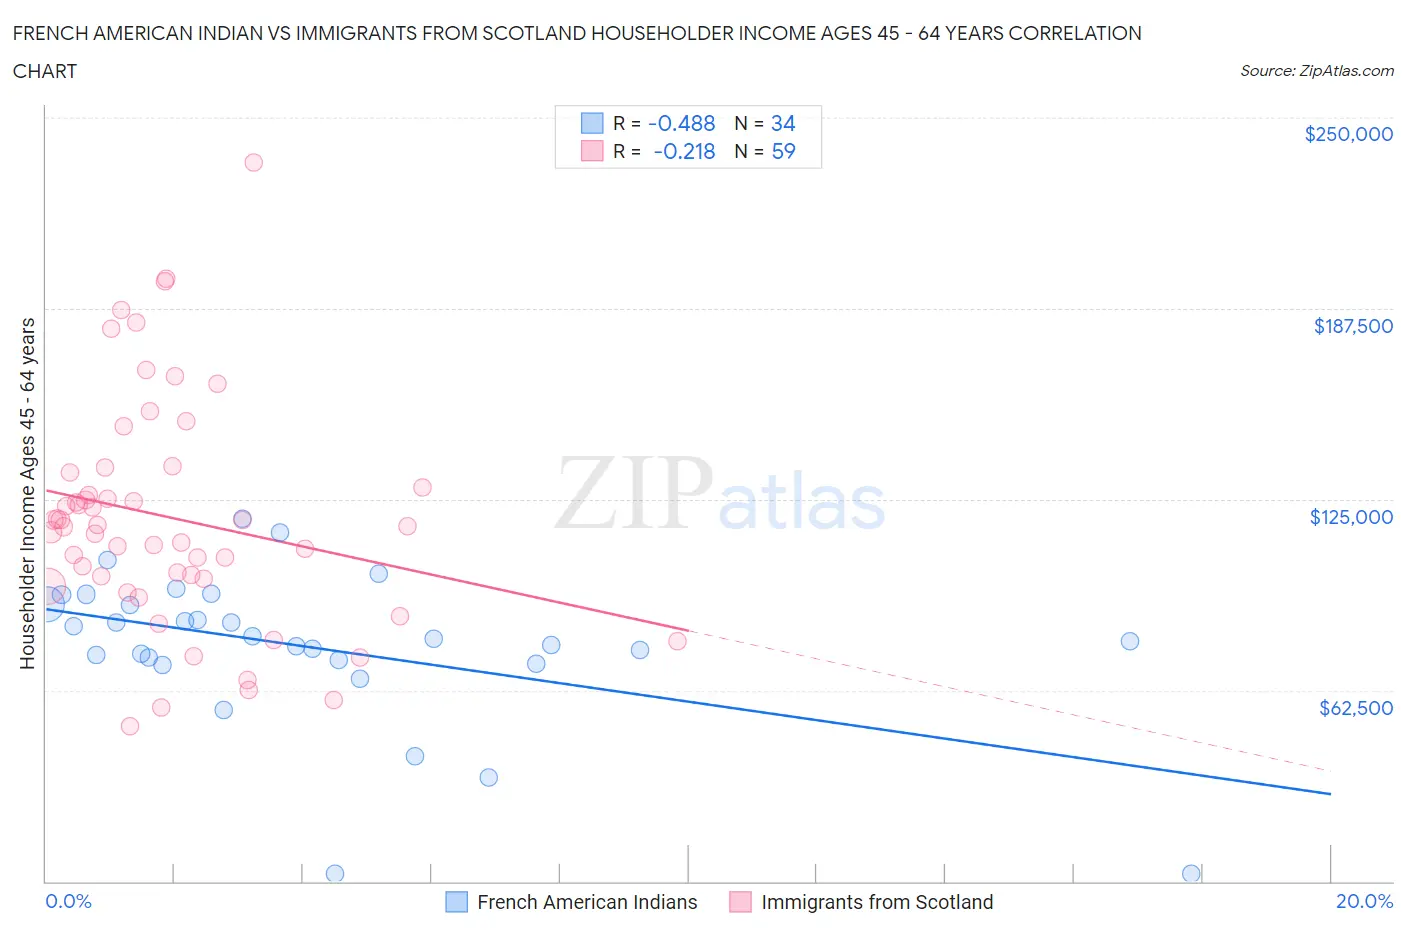 French American Indian vs Immigrants from Scotland Householder Income Ages 45 - 64 years